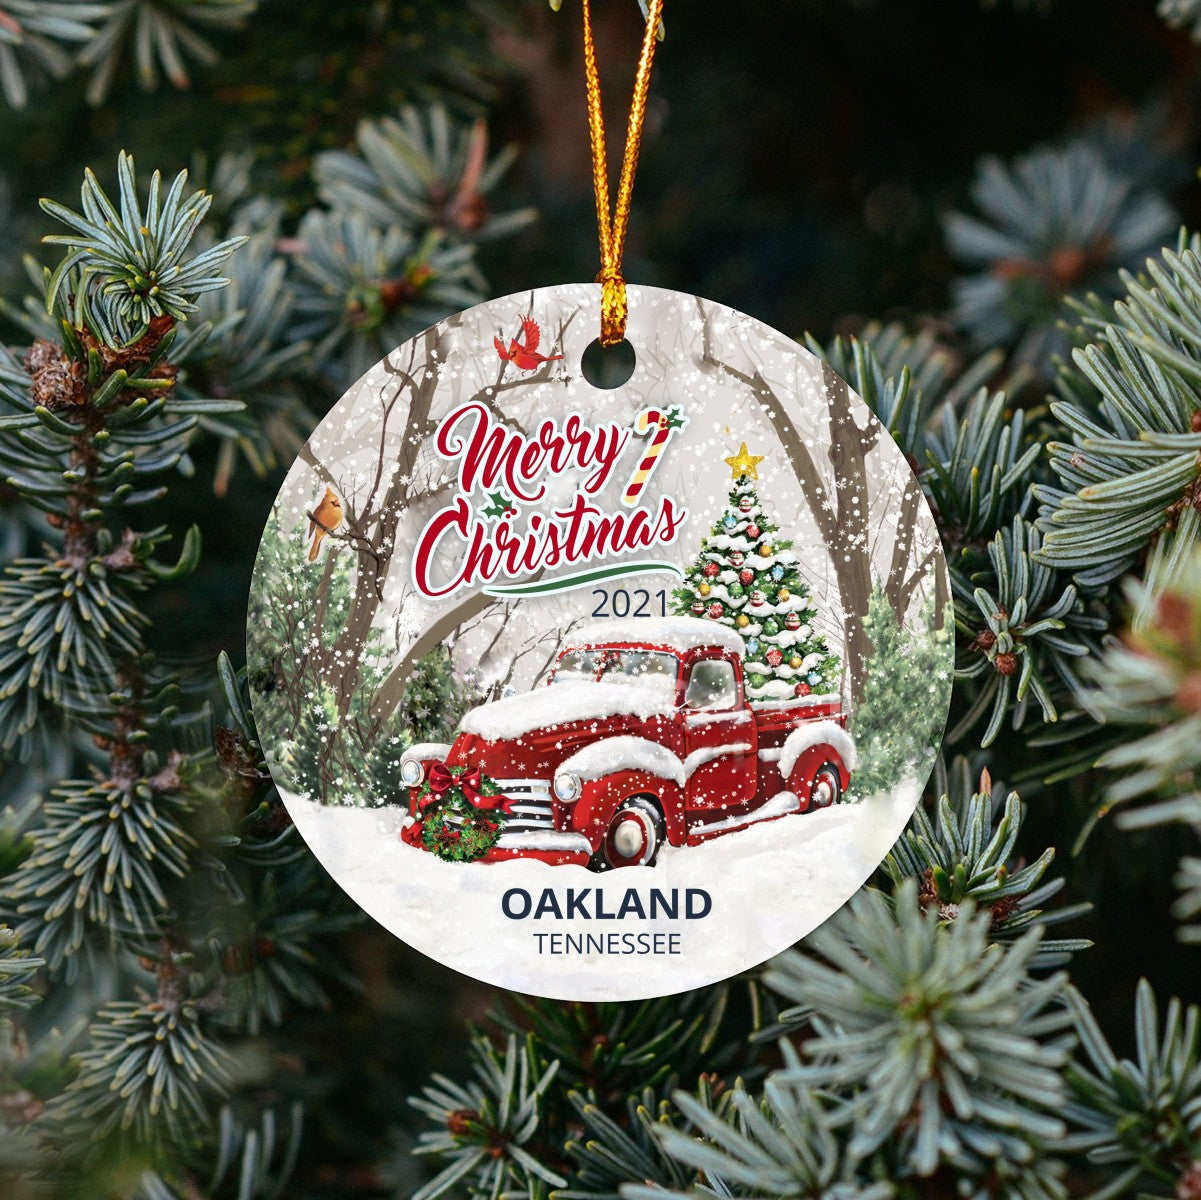 Christmas Tree Ornaments Oakland - Ornament With Name City, State Oakland Tennessee TN Ornament - Red Truck Xmas Ornaments 3'' Plastic Gift For Family, Friend And Housewarming